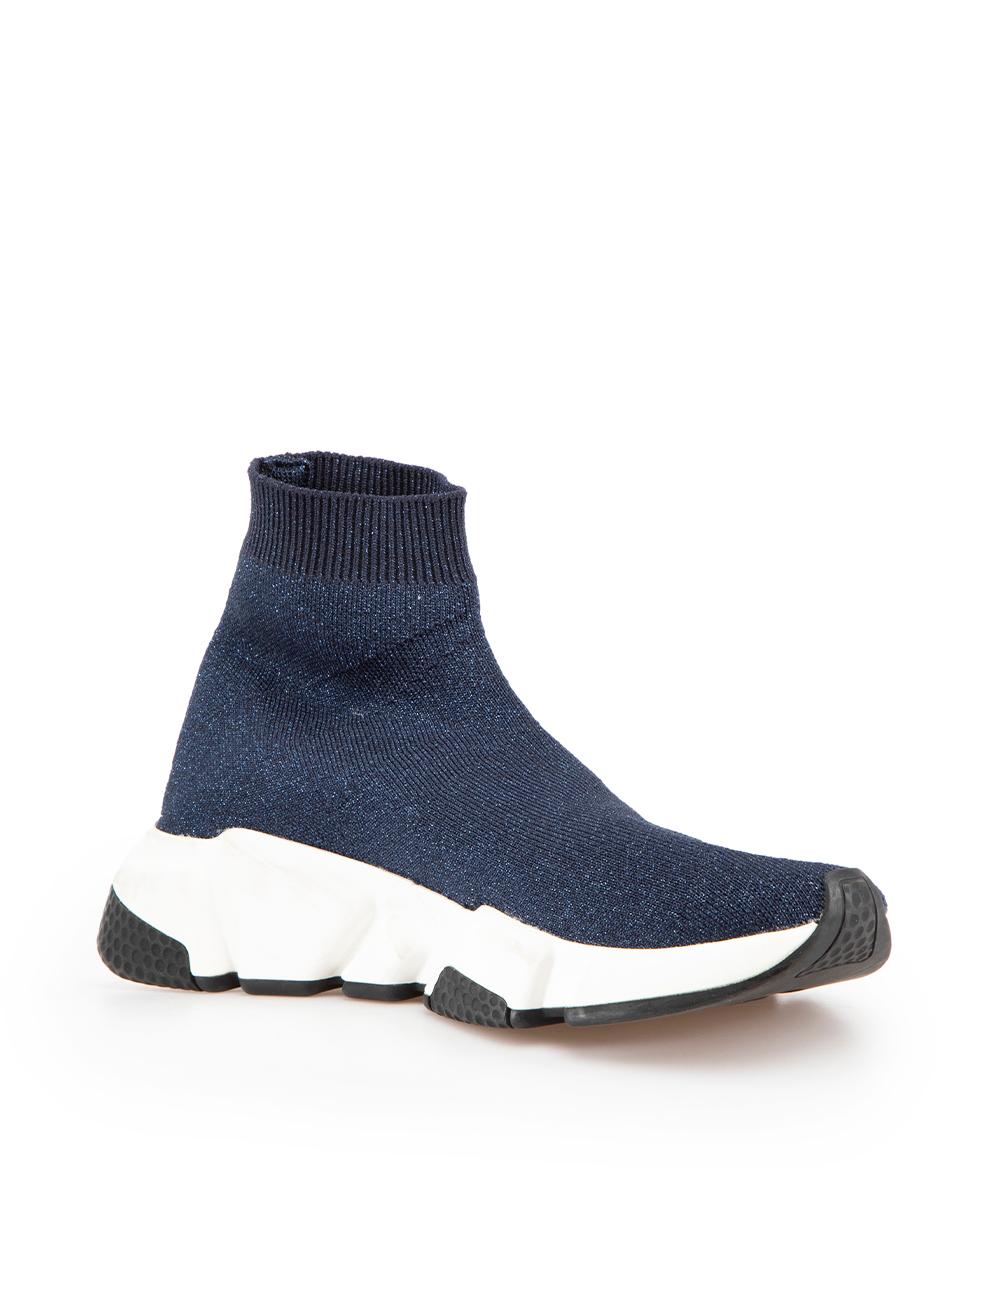 CONDITION is Very good. Minimal wear to shoes is evident. Minimal wear to both shoe soles with dark marks to the rubber on this used Balenciaga designer resale item.
 
 Details
 Speed model
 Navy
 Cloth textile
 Sock trainers
 High top
 Glitter